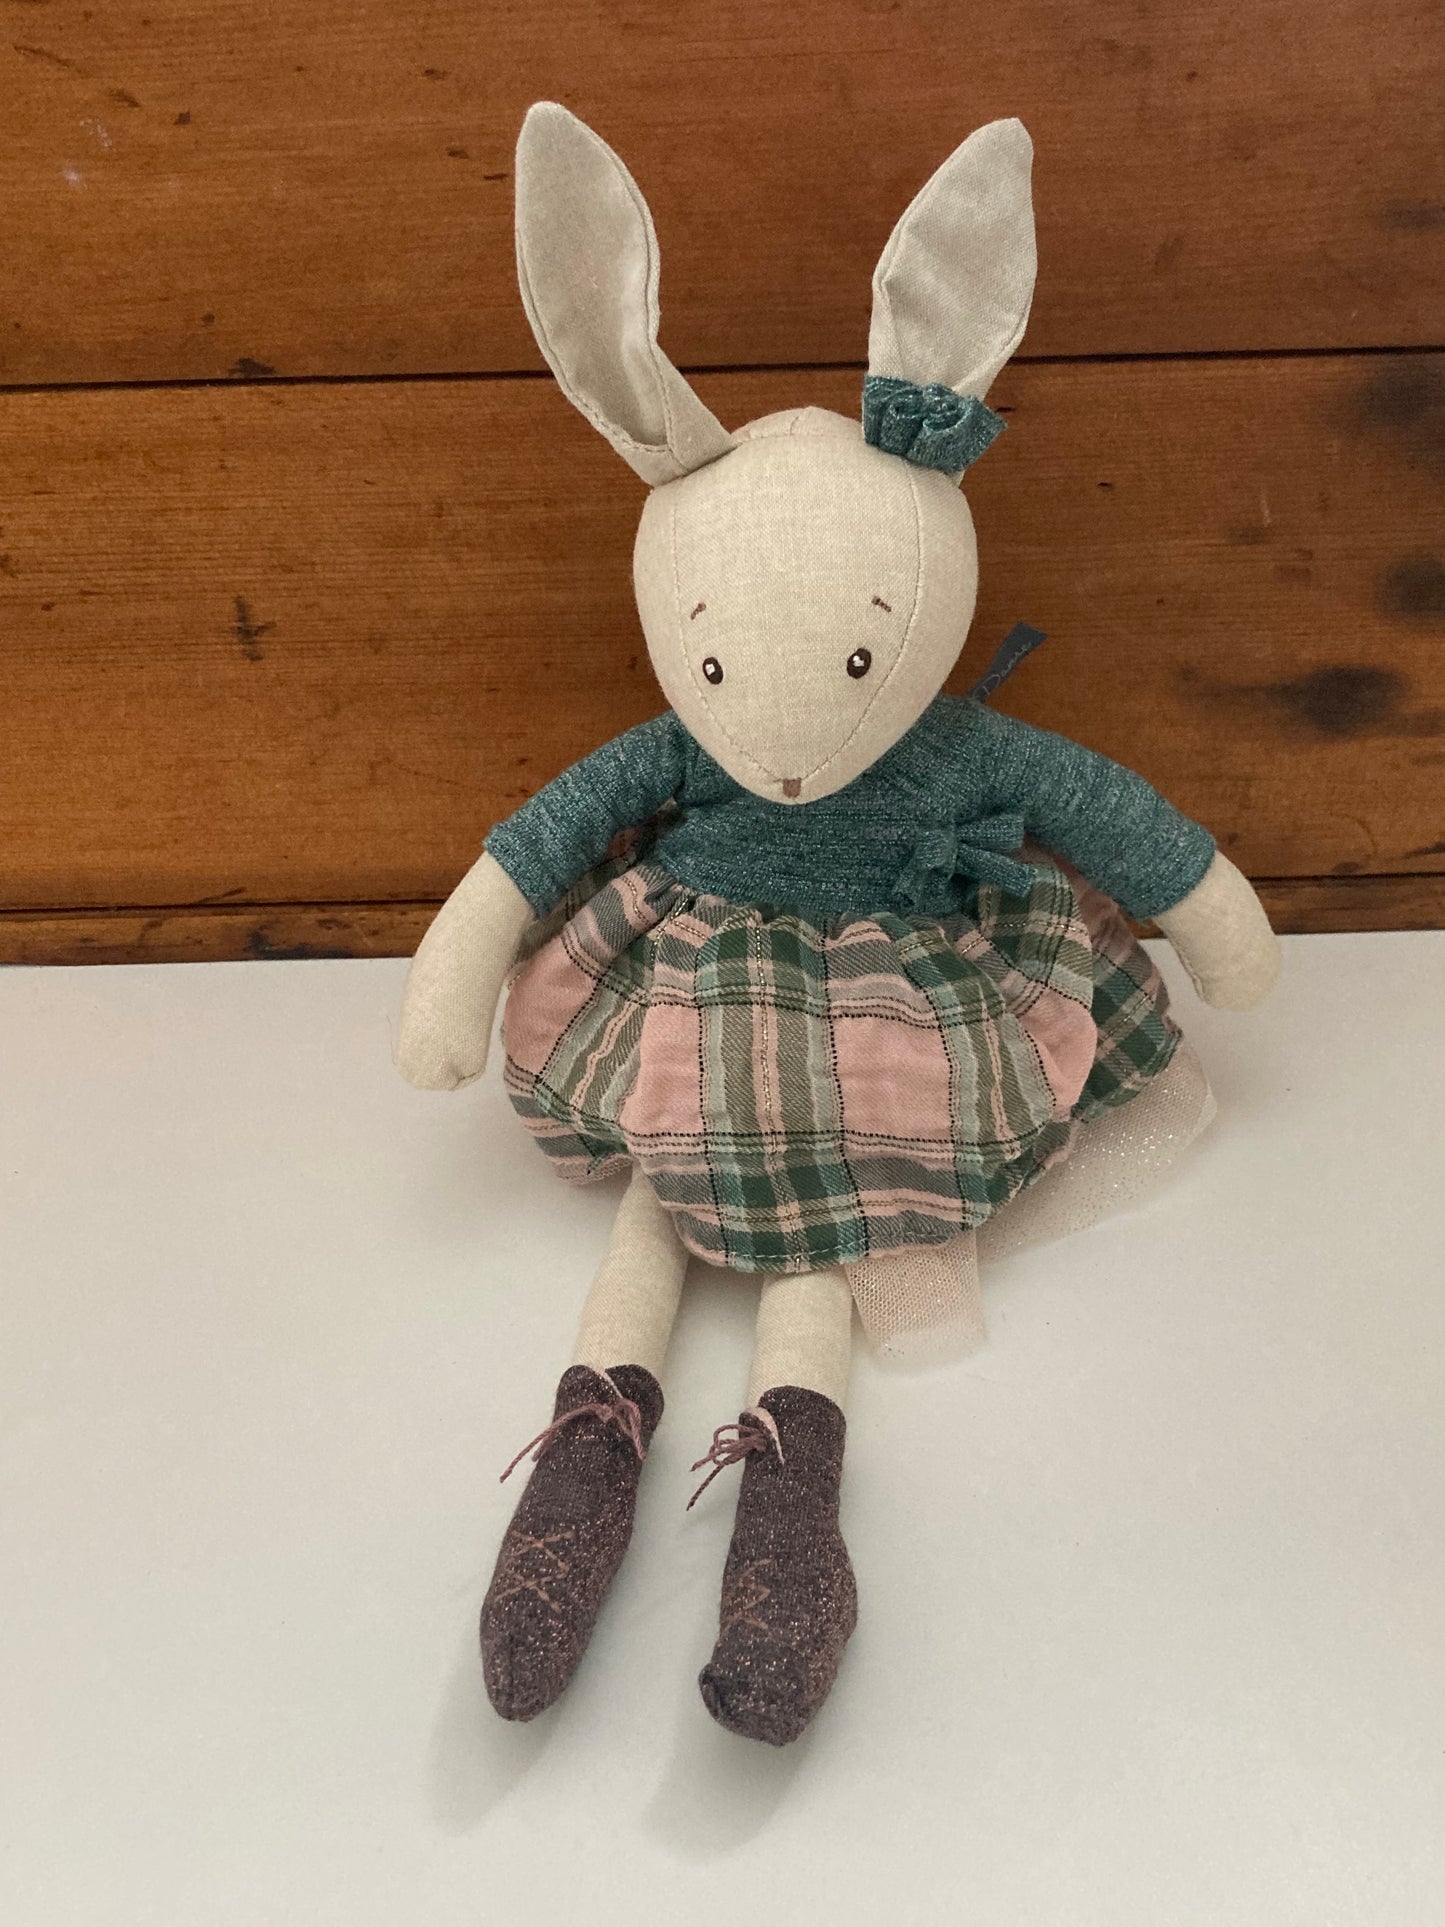 Soft Doll - RAG RABBIT DOLL, in a skirt (14 inches)